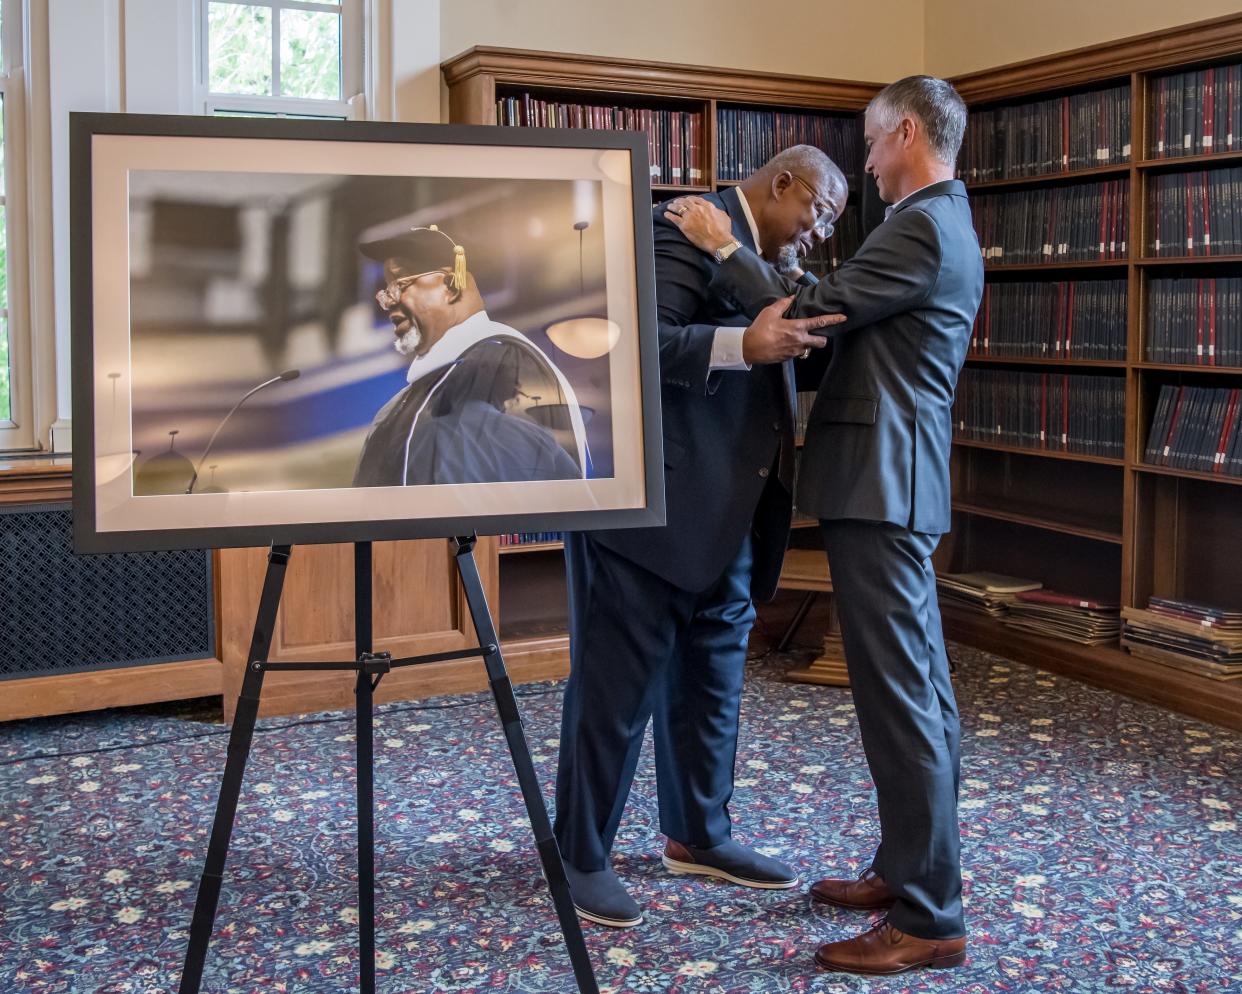 Drake University President Marty Martin embraces Wayne Ford, former state legislator and founder of the social services nonprofit Urban Dreams, on May 19, 2022, at the unveiling of Ford's official portrait at Drake's Cowles Library.